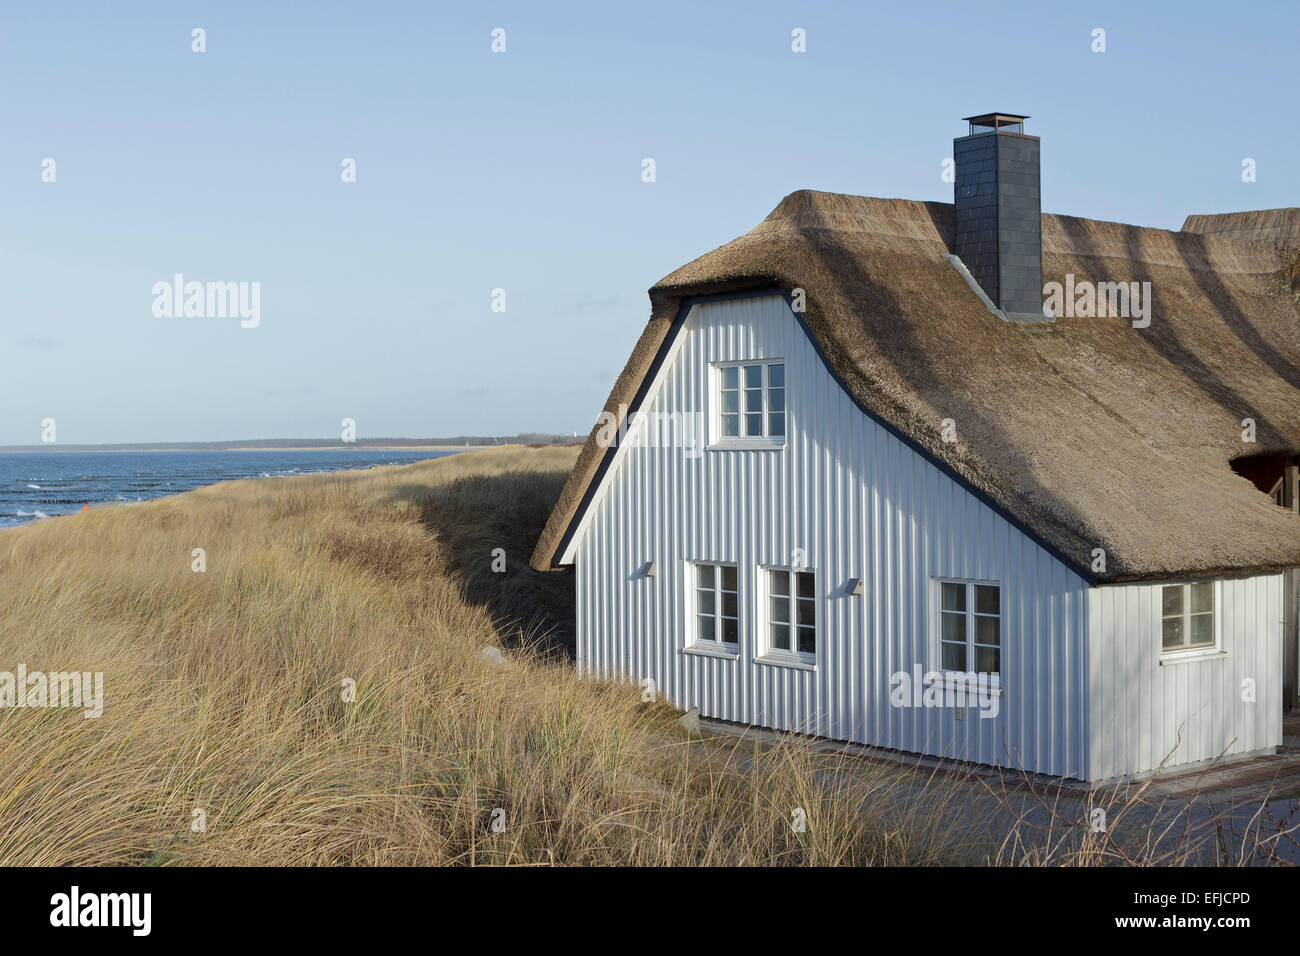 thatched house at the beach, Ahrenshoop, Mecklenburg-West Pomerania, Germany Stock Photo